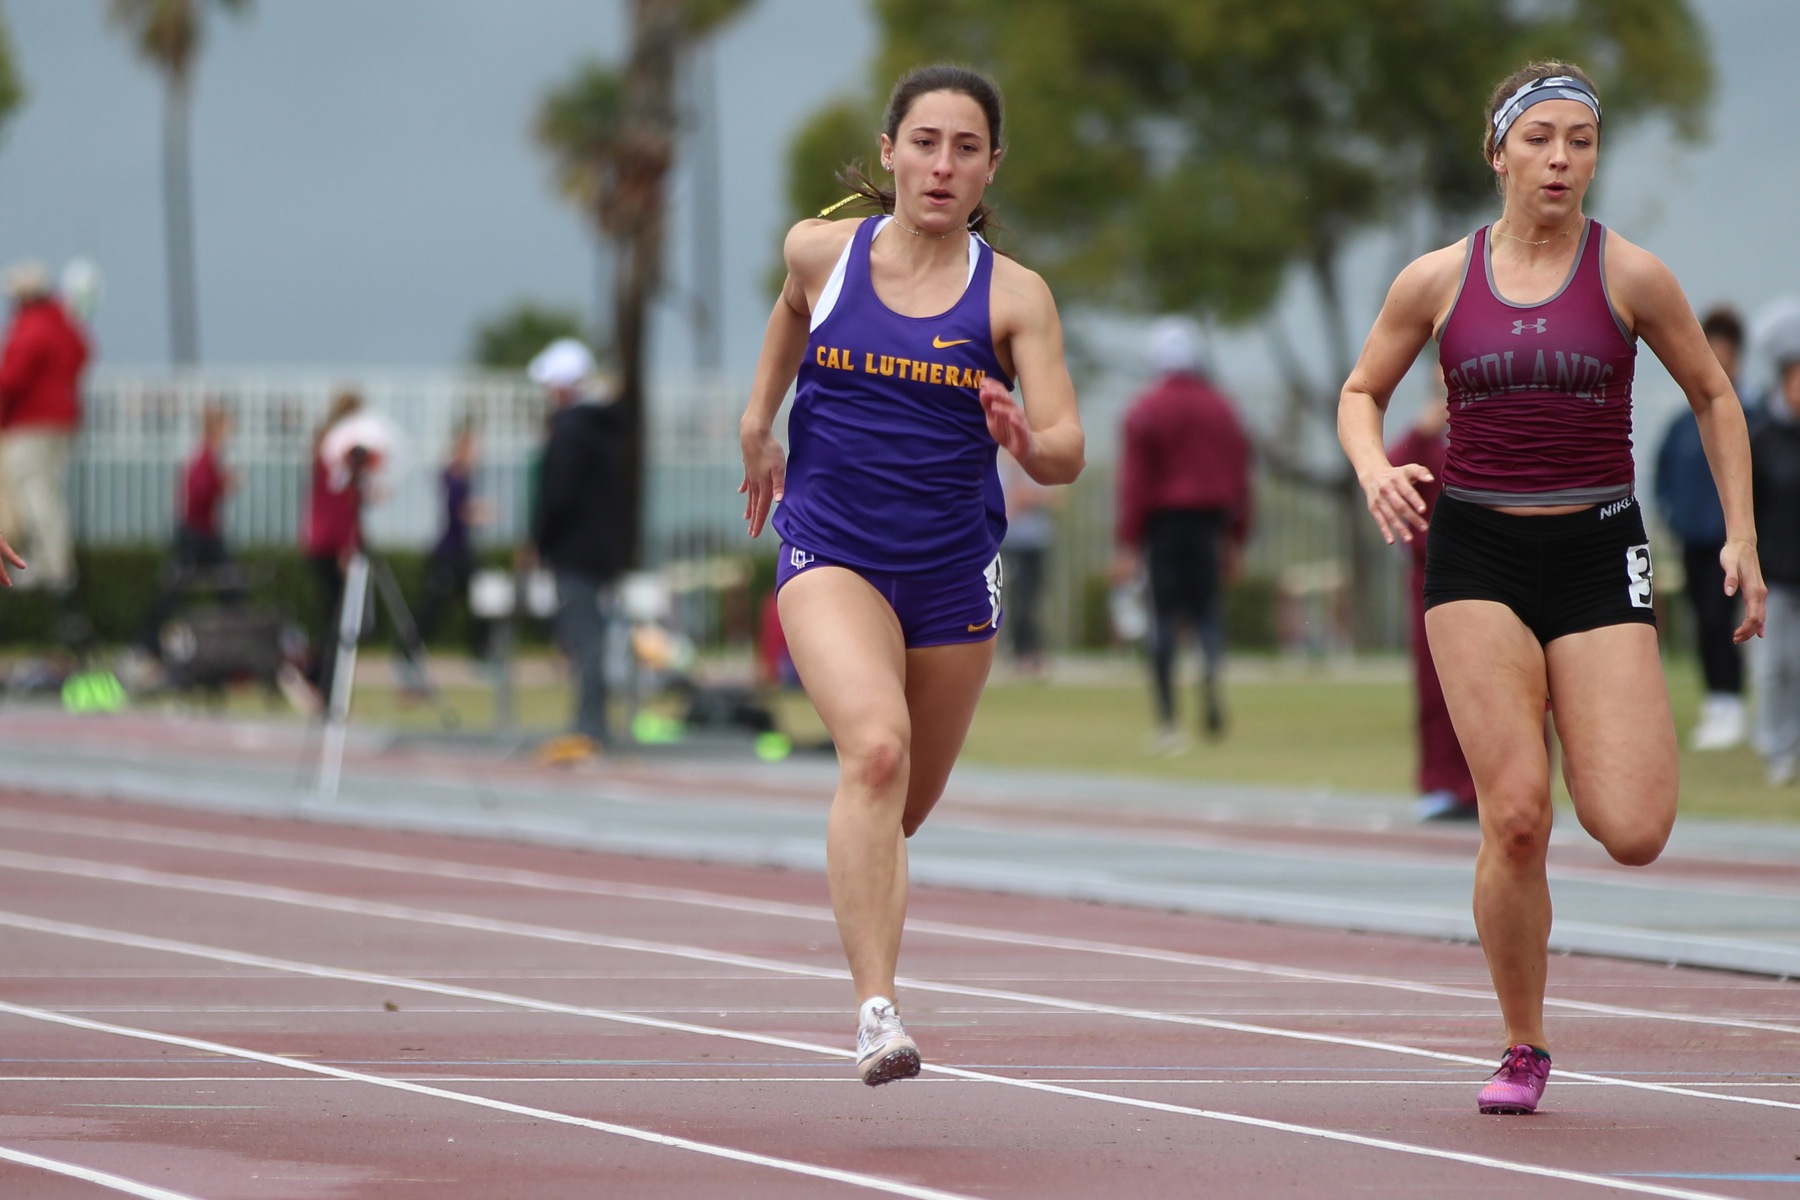 Regals Claim Six First-Place Finishes at SCIAC Multi-Dual No. 2